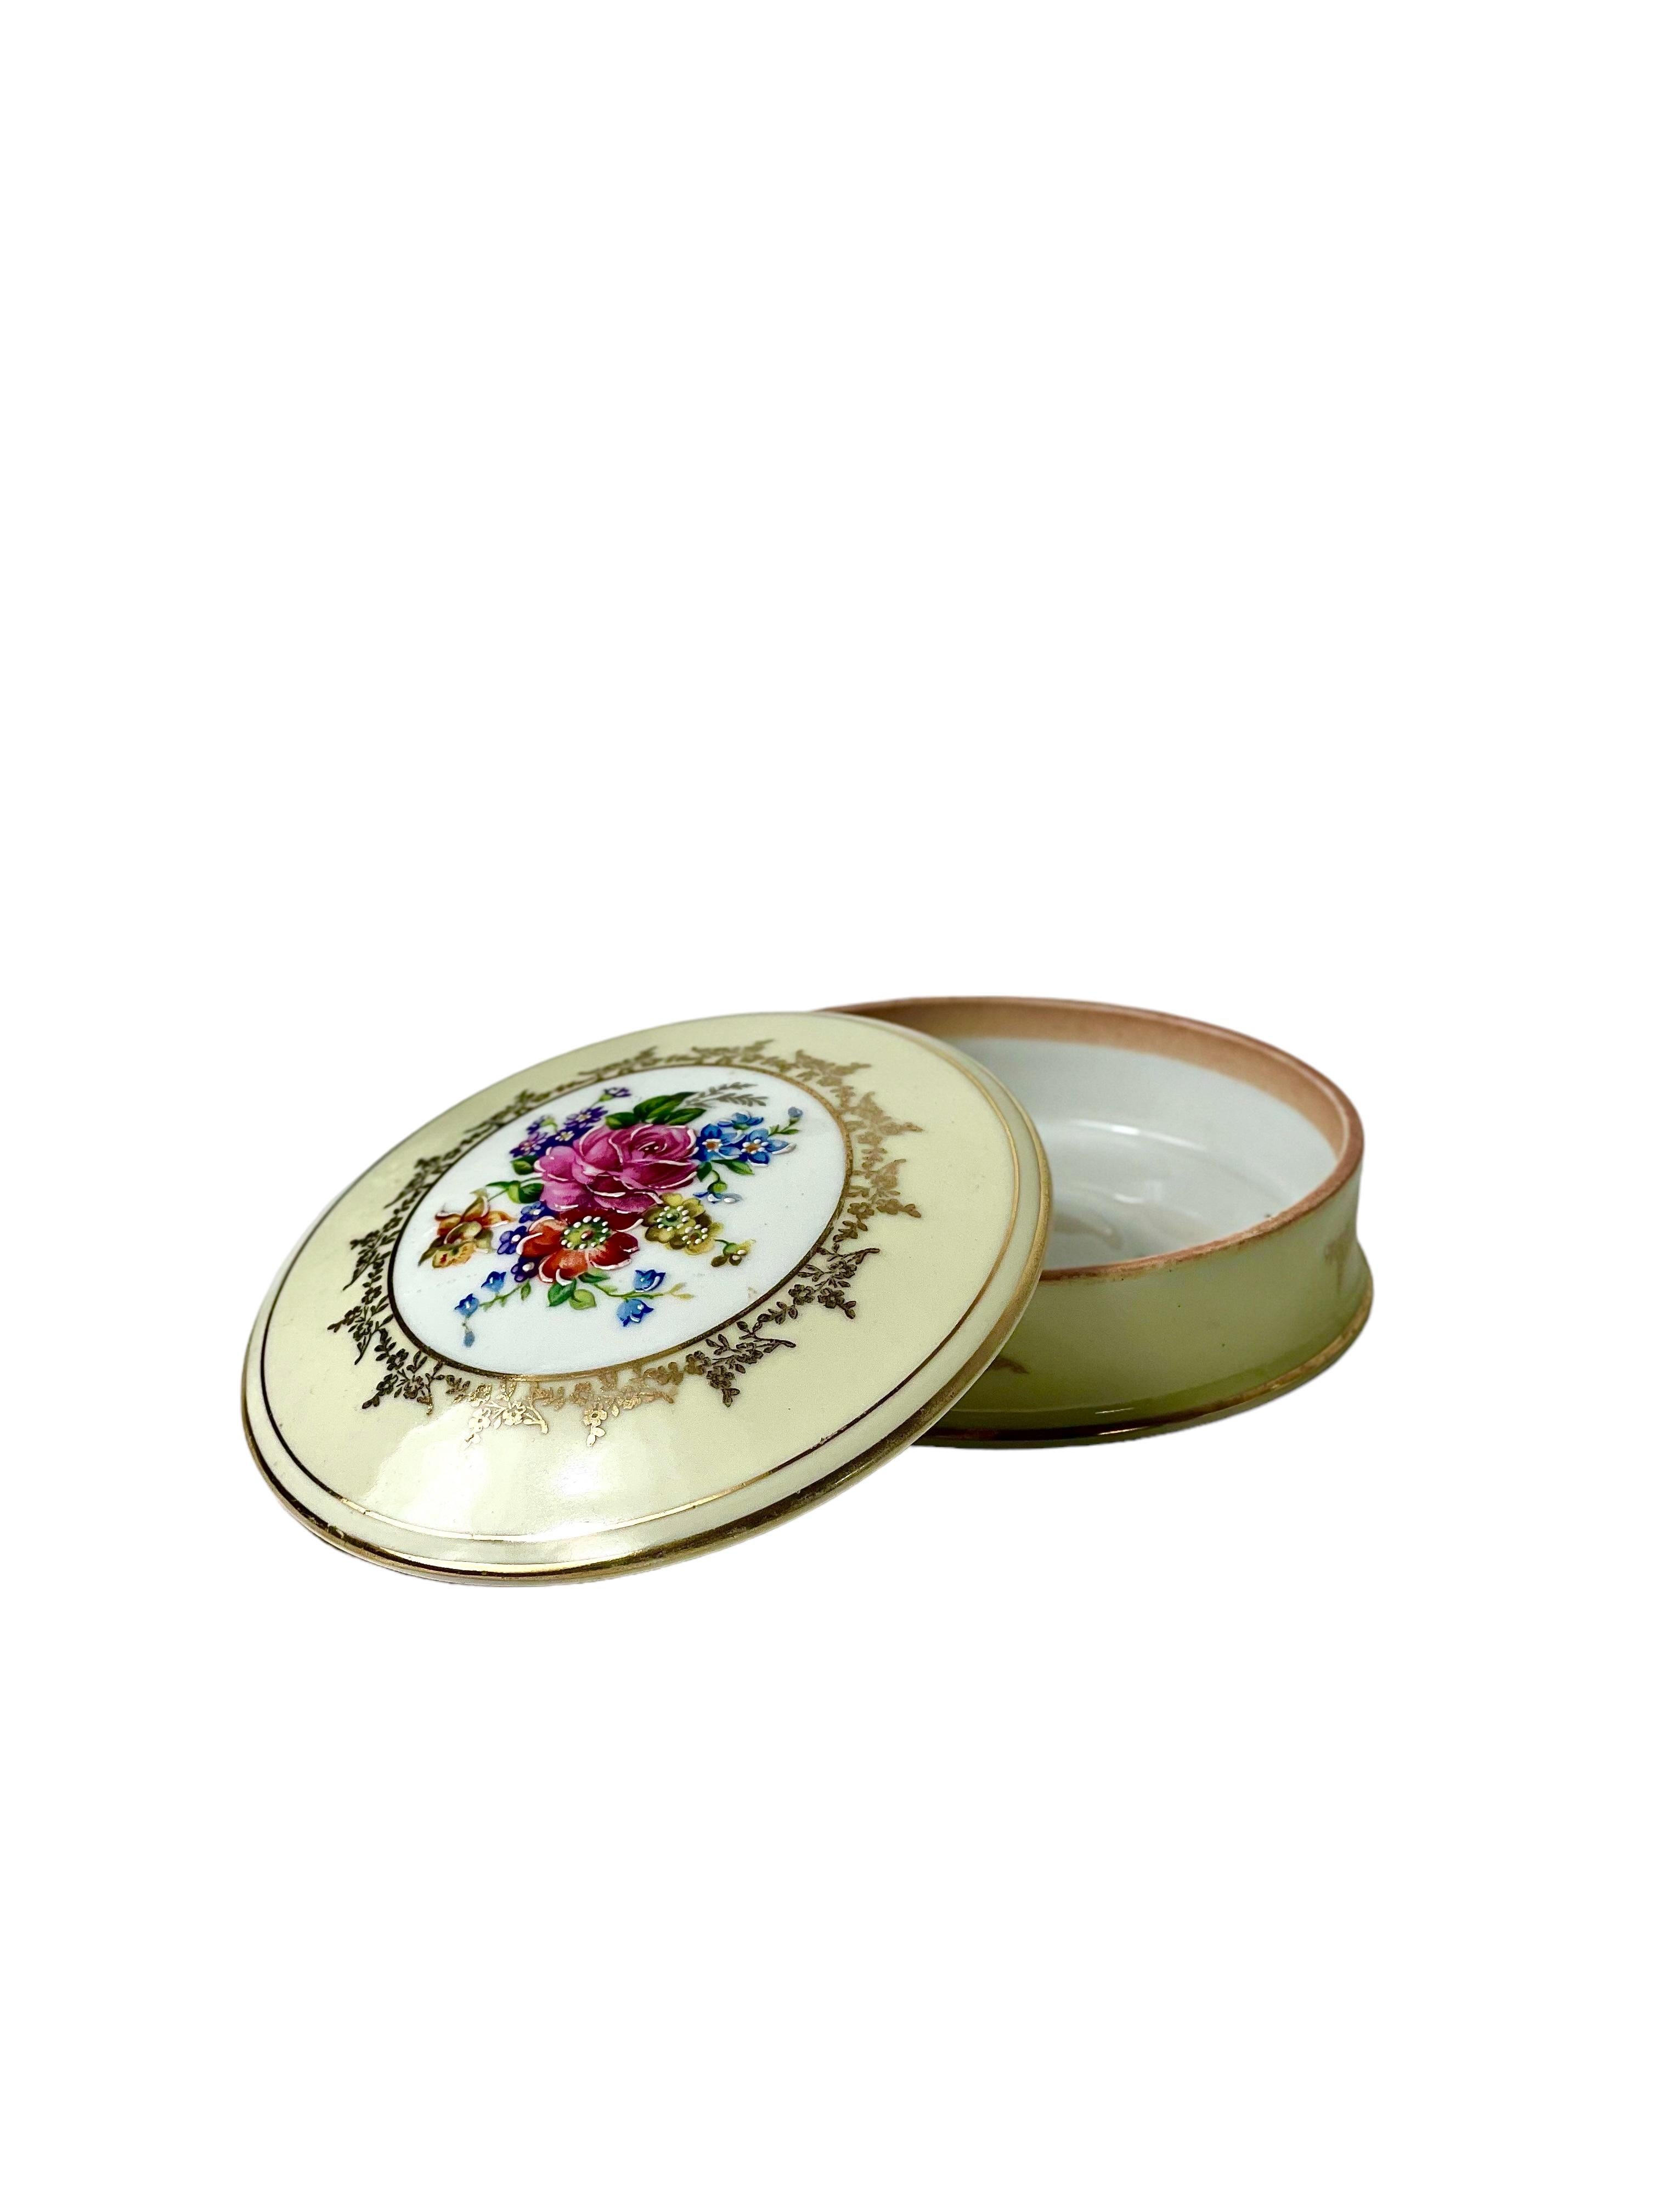 Beautiful Limoges porcelain hand-crafted and hand-painted, gold-rimmed trinket, jewellery box or lidded sweets dish. 
Glazed throughout in a creamy ivory, the lid of the dish features a startlingly vivid bouquet of wildflowers and foliage, enclosed